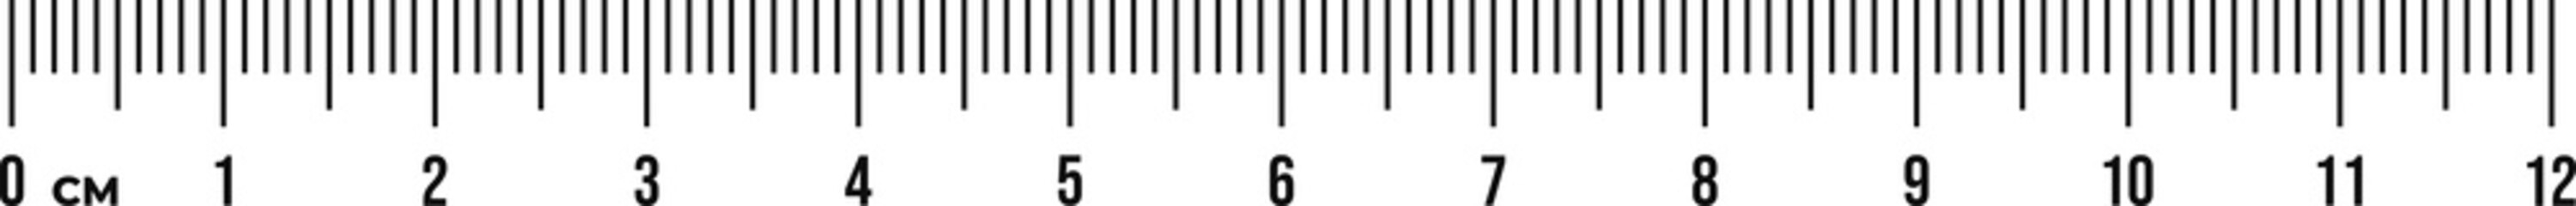 Ruler scale 12 cm. Centimeter scale for measuring